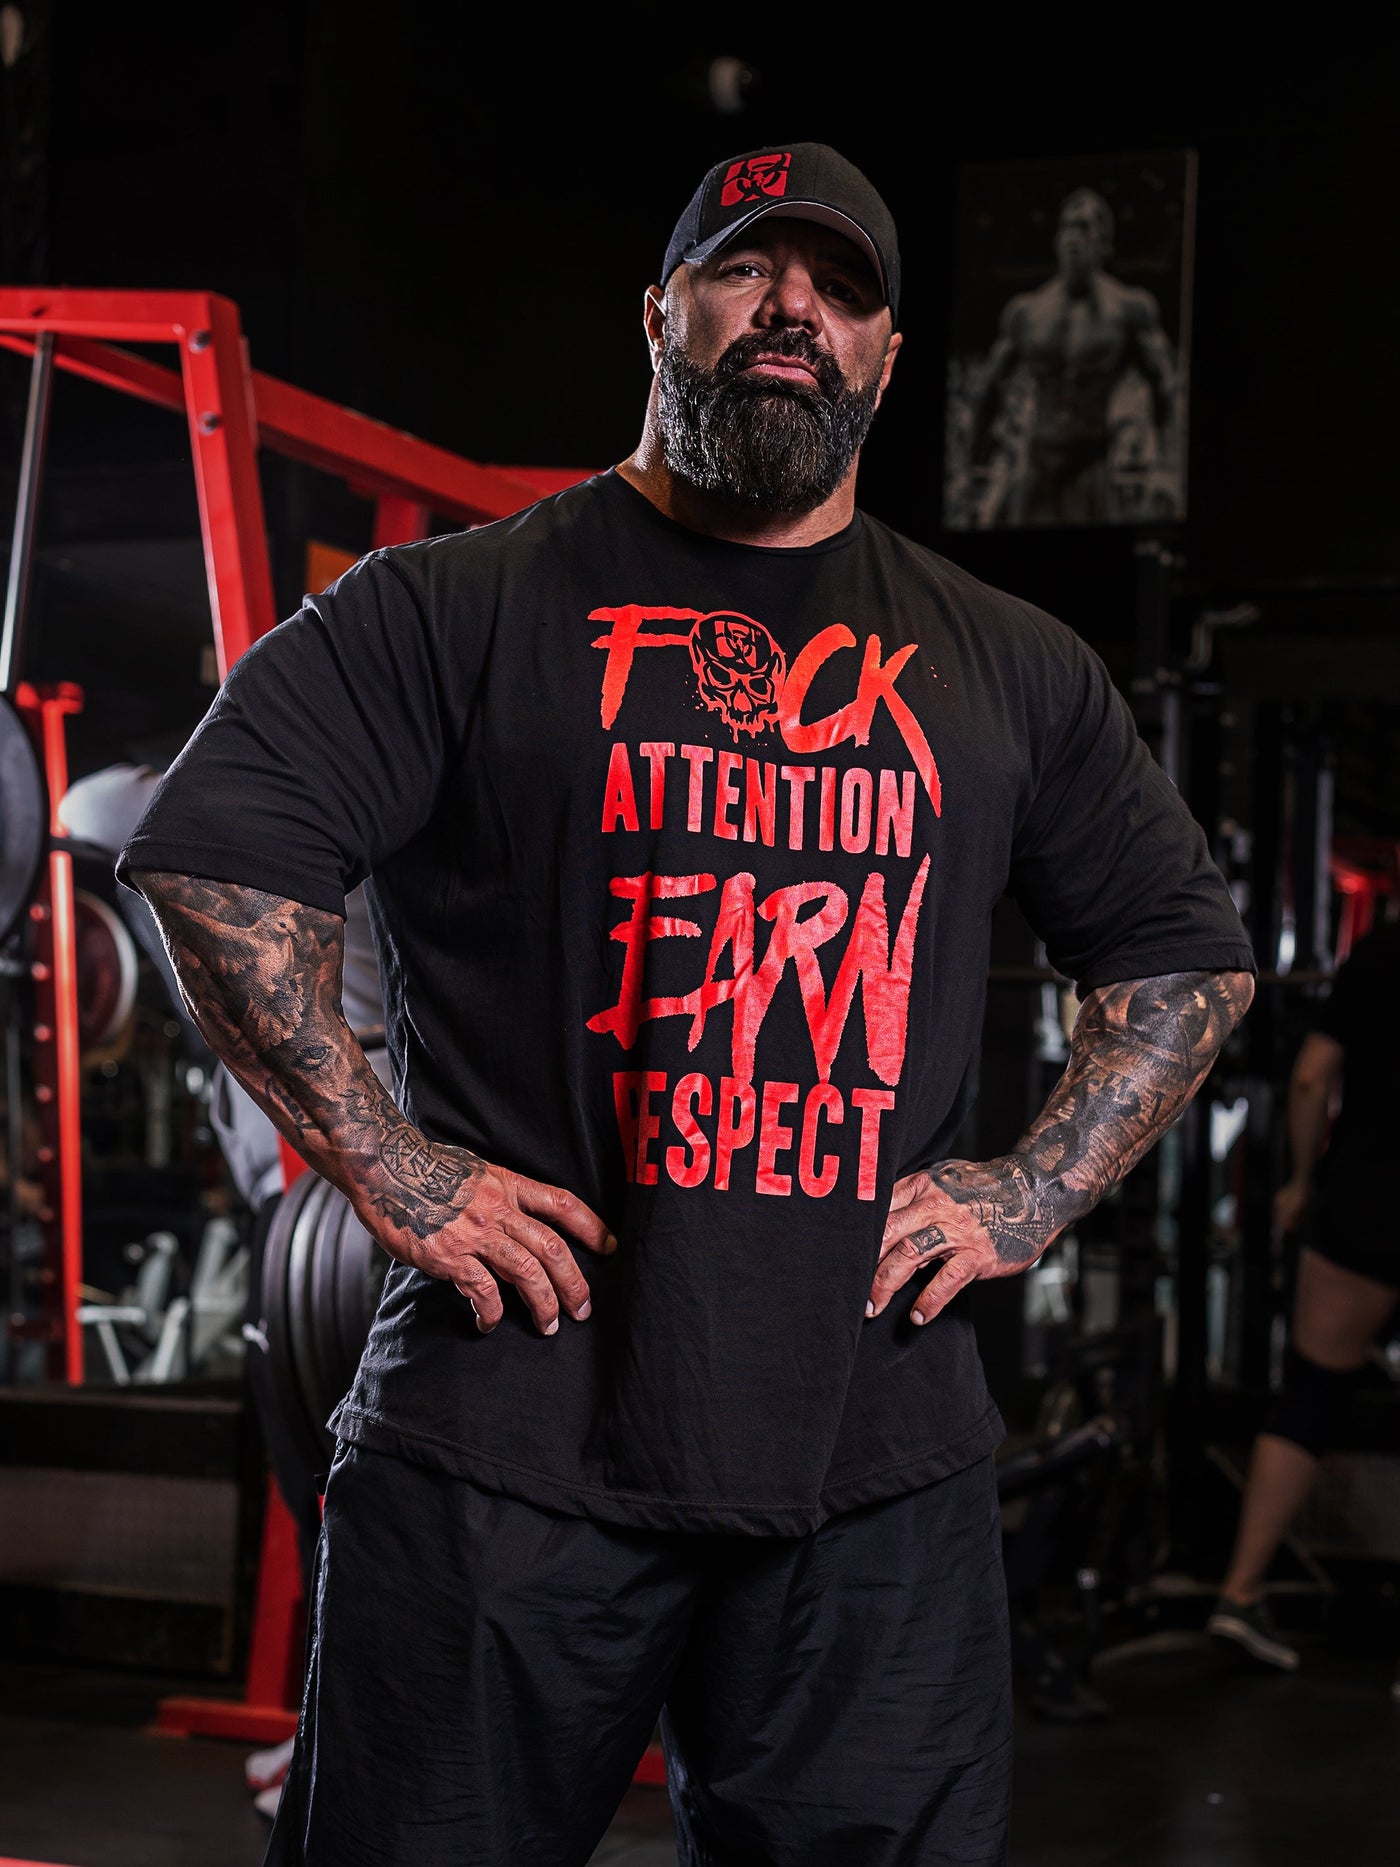 Dusty Hanshaw, Mutant athlete, posing in the gym wearing the Black 'Dusty Says' Mutant Oversized Gym T-shirt with his motto 'F*ck attention earn respect' in red.